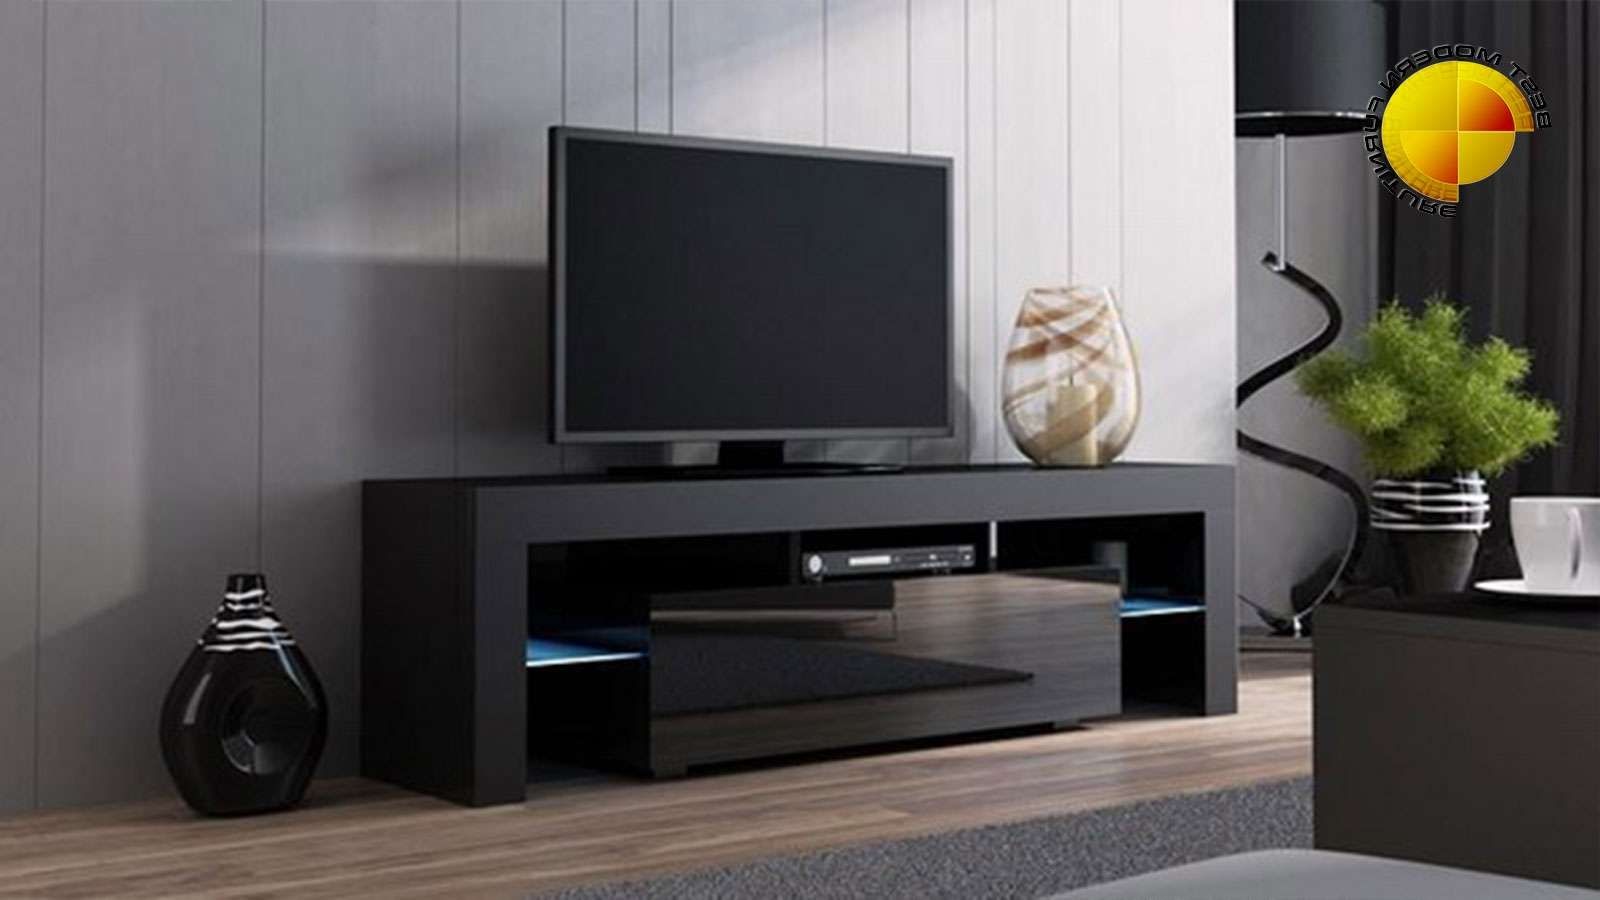 Modern Tv Stand 160cm High Gloss Cabinet Rgb Led Lights Black Unit Intended For Modern Black Tv Stands (View 10 of 20)